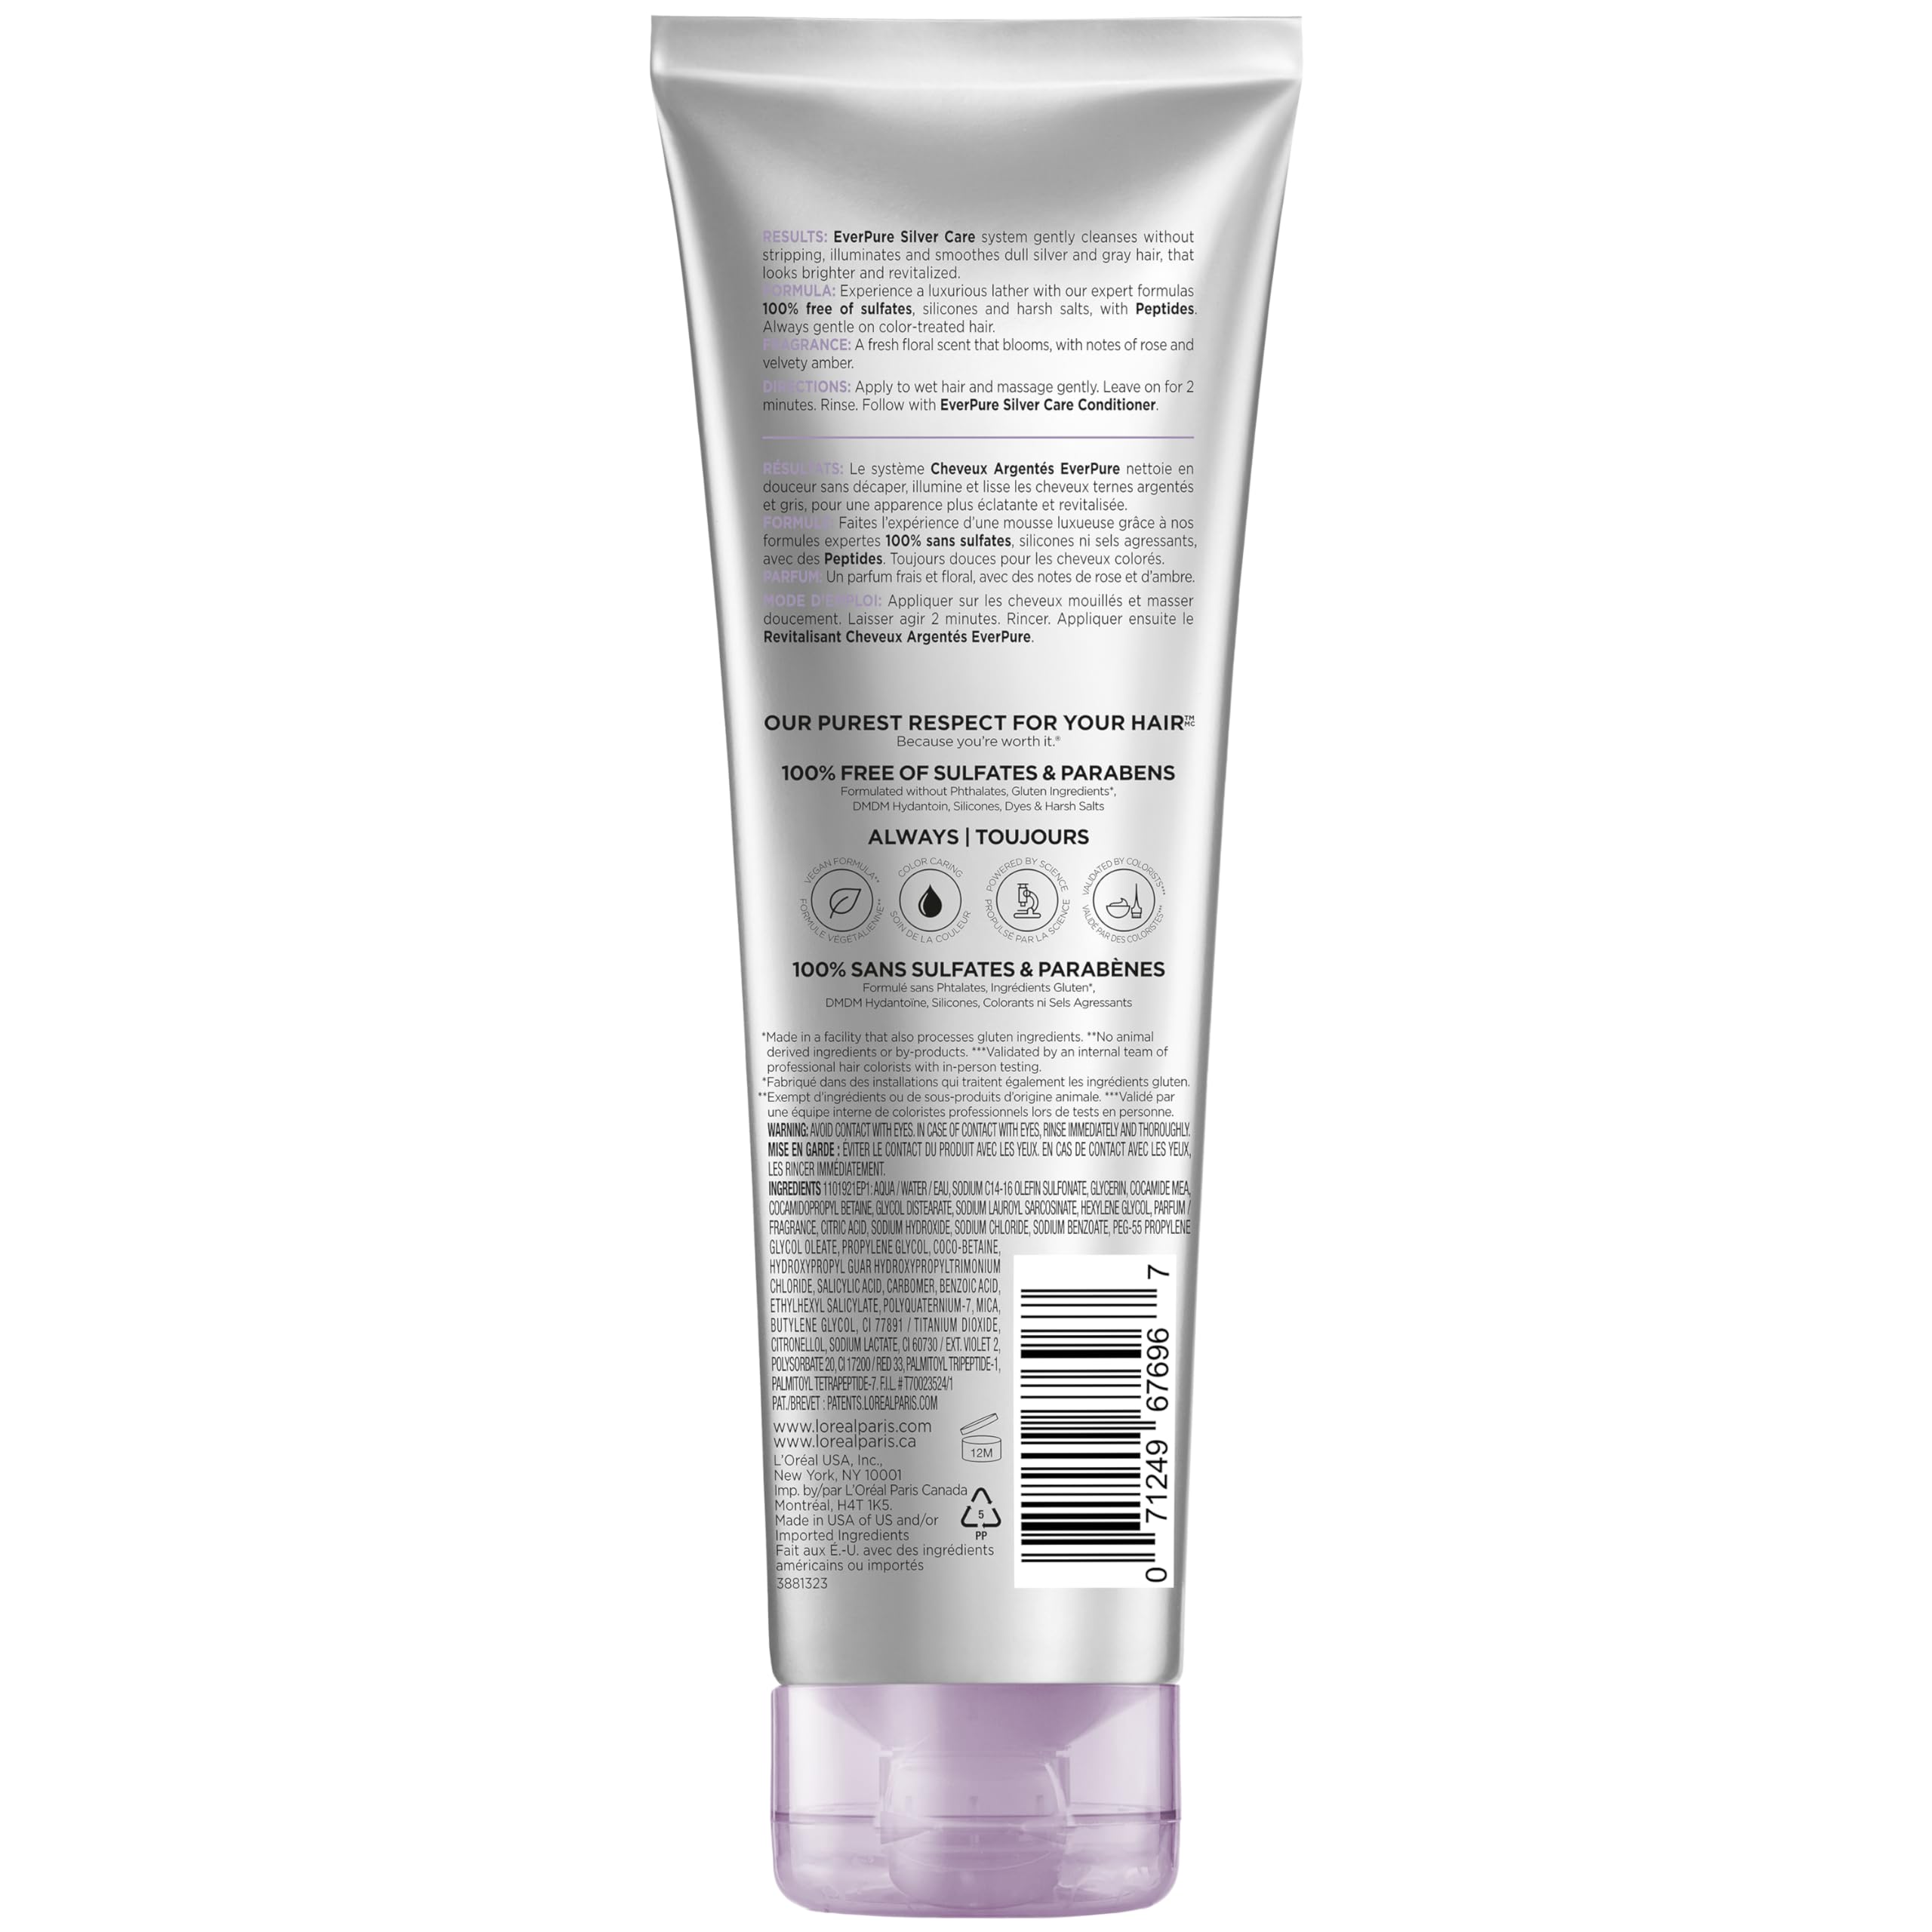 L'Oreal Paris EverPure Silver Care Sulfate Free Shampoo, Brightening and Nourishing Hair Care for Gray and Silver Hair, Vegan Formula with Peptides, 8.5 Fl Oz